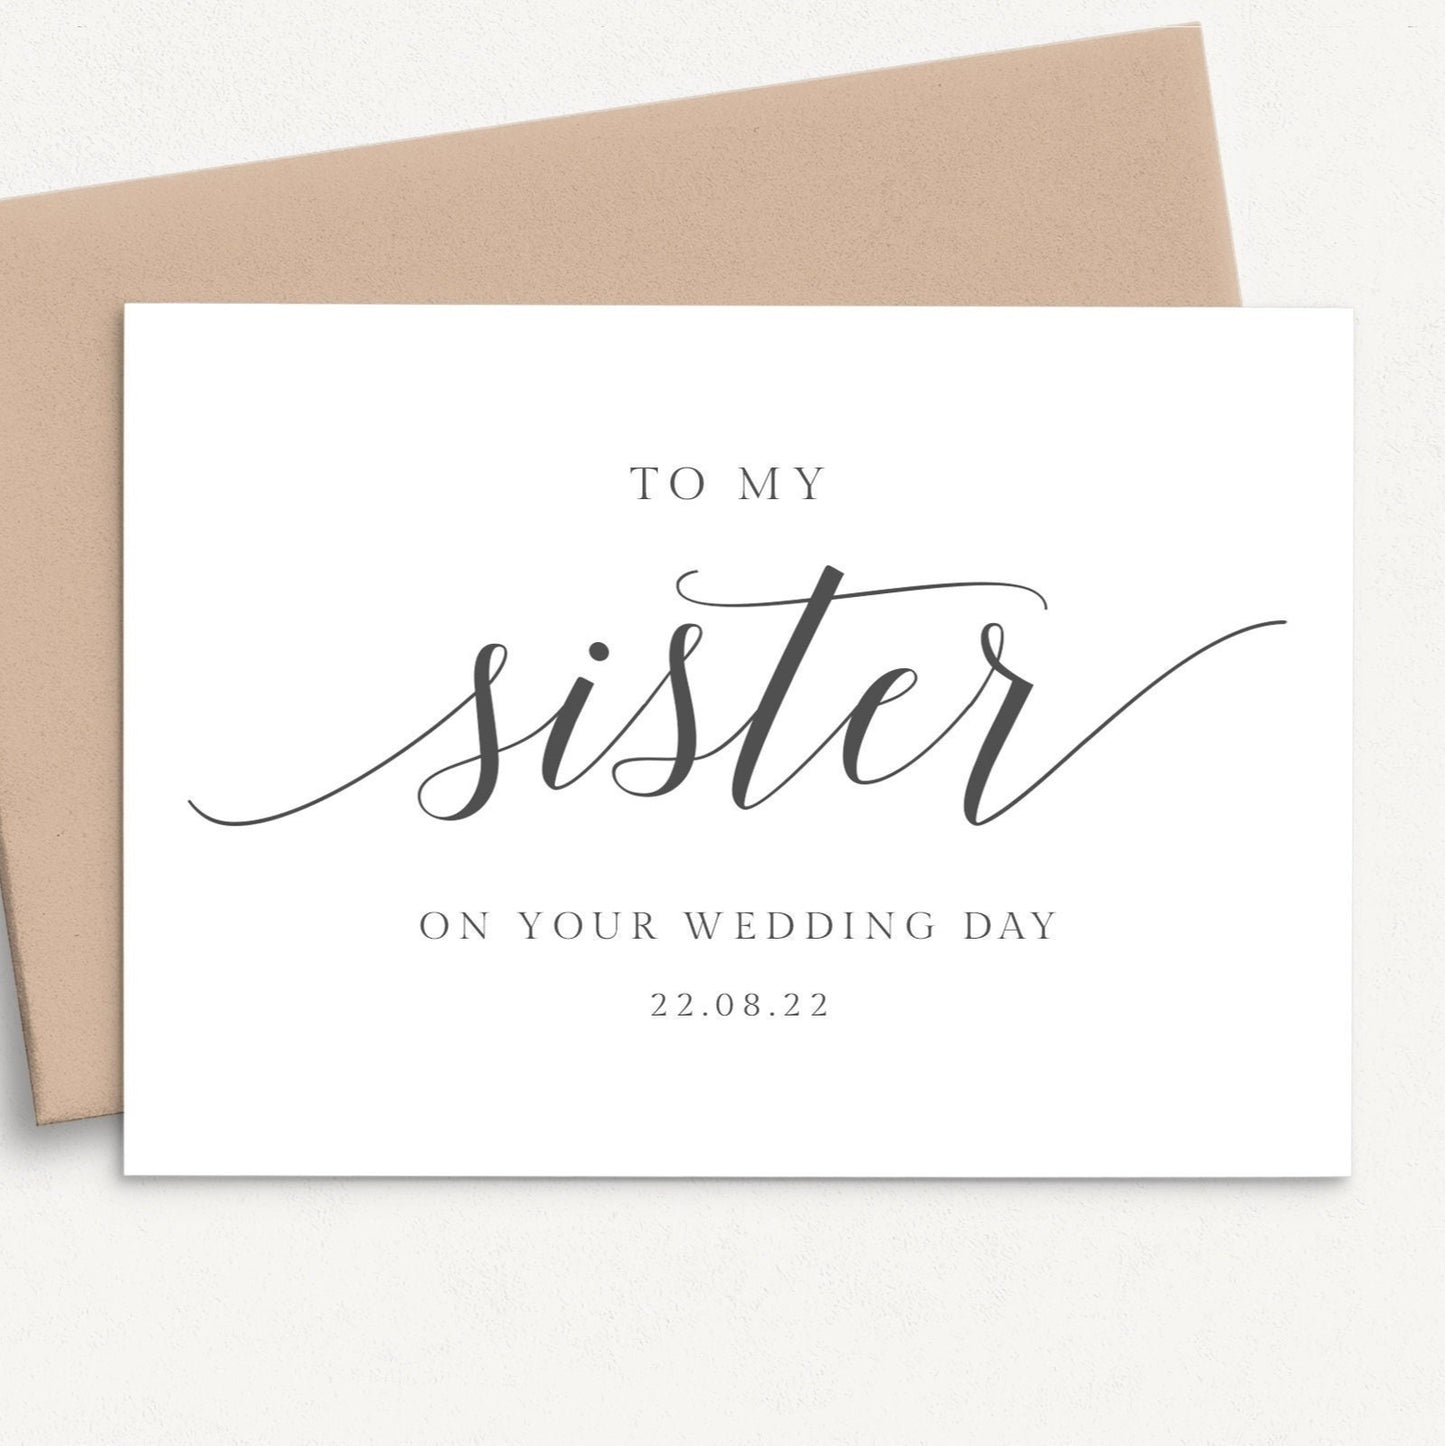 Personalized Wedding Card for Sister, Black and White Design